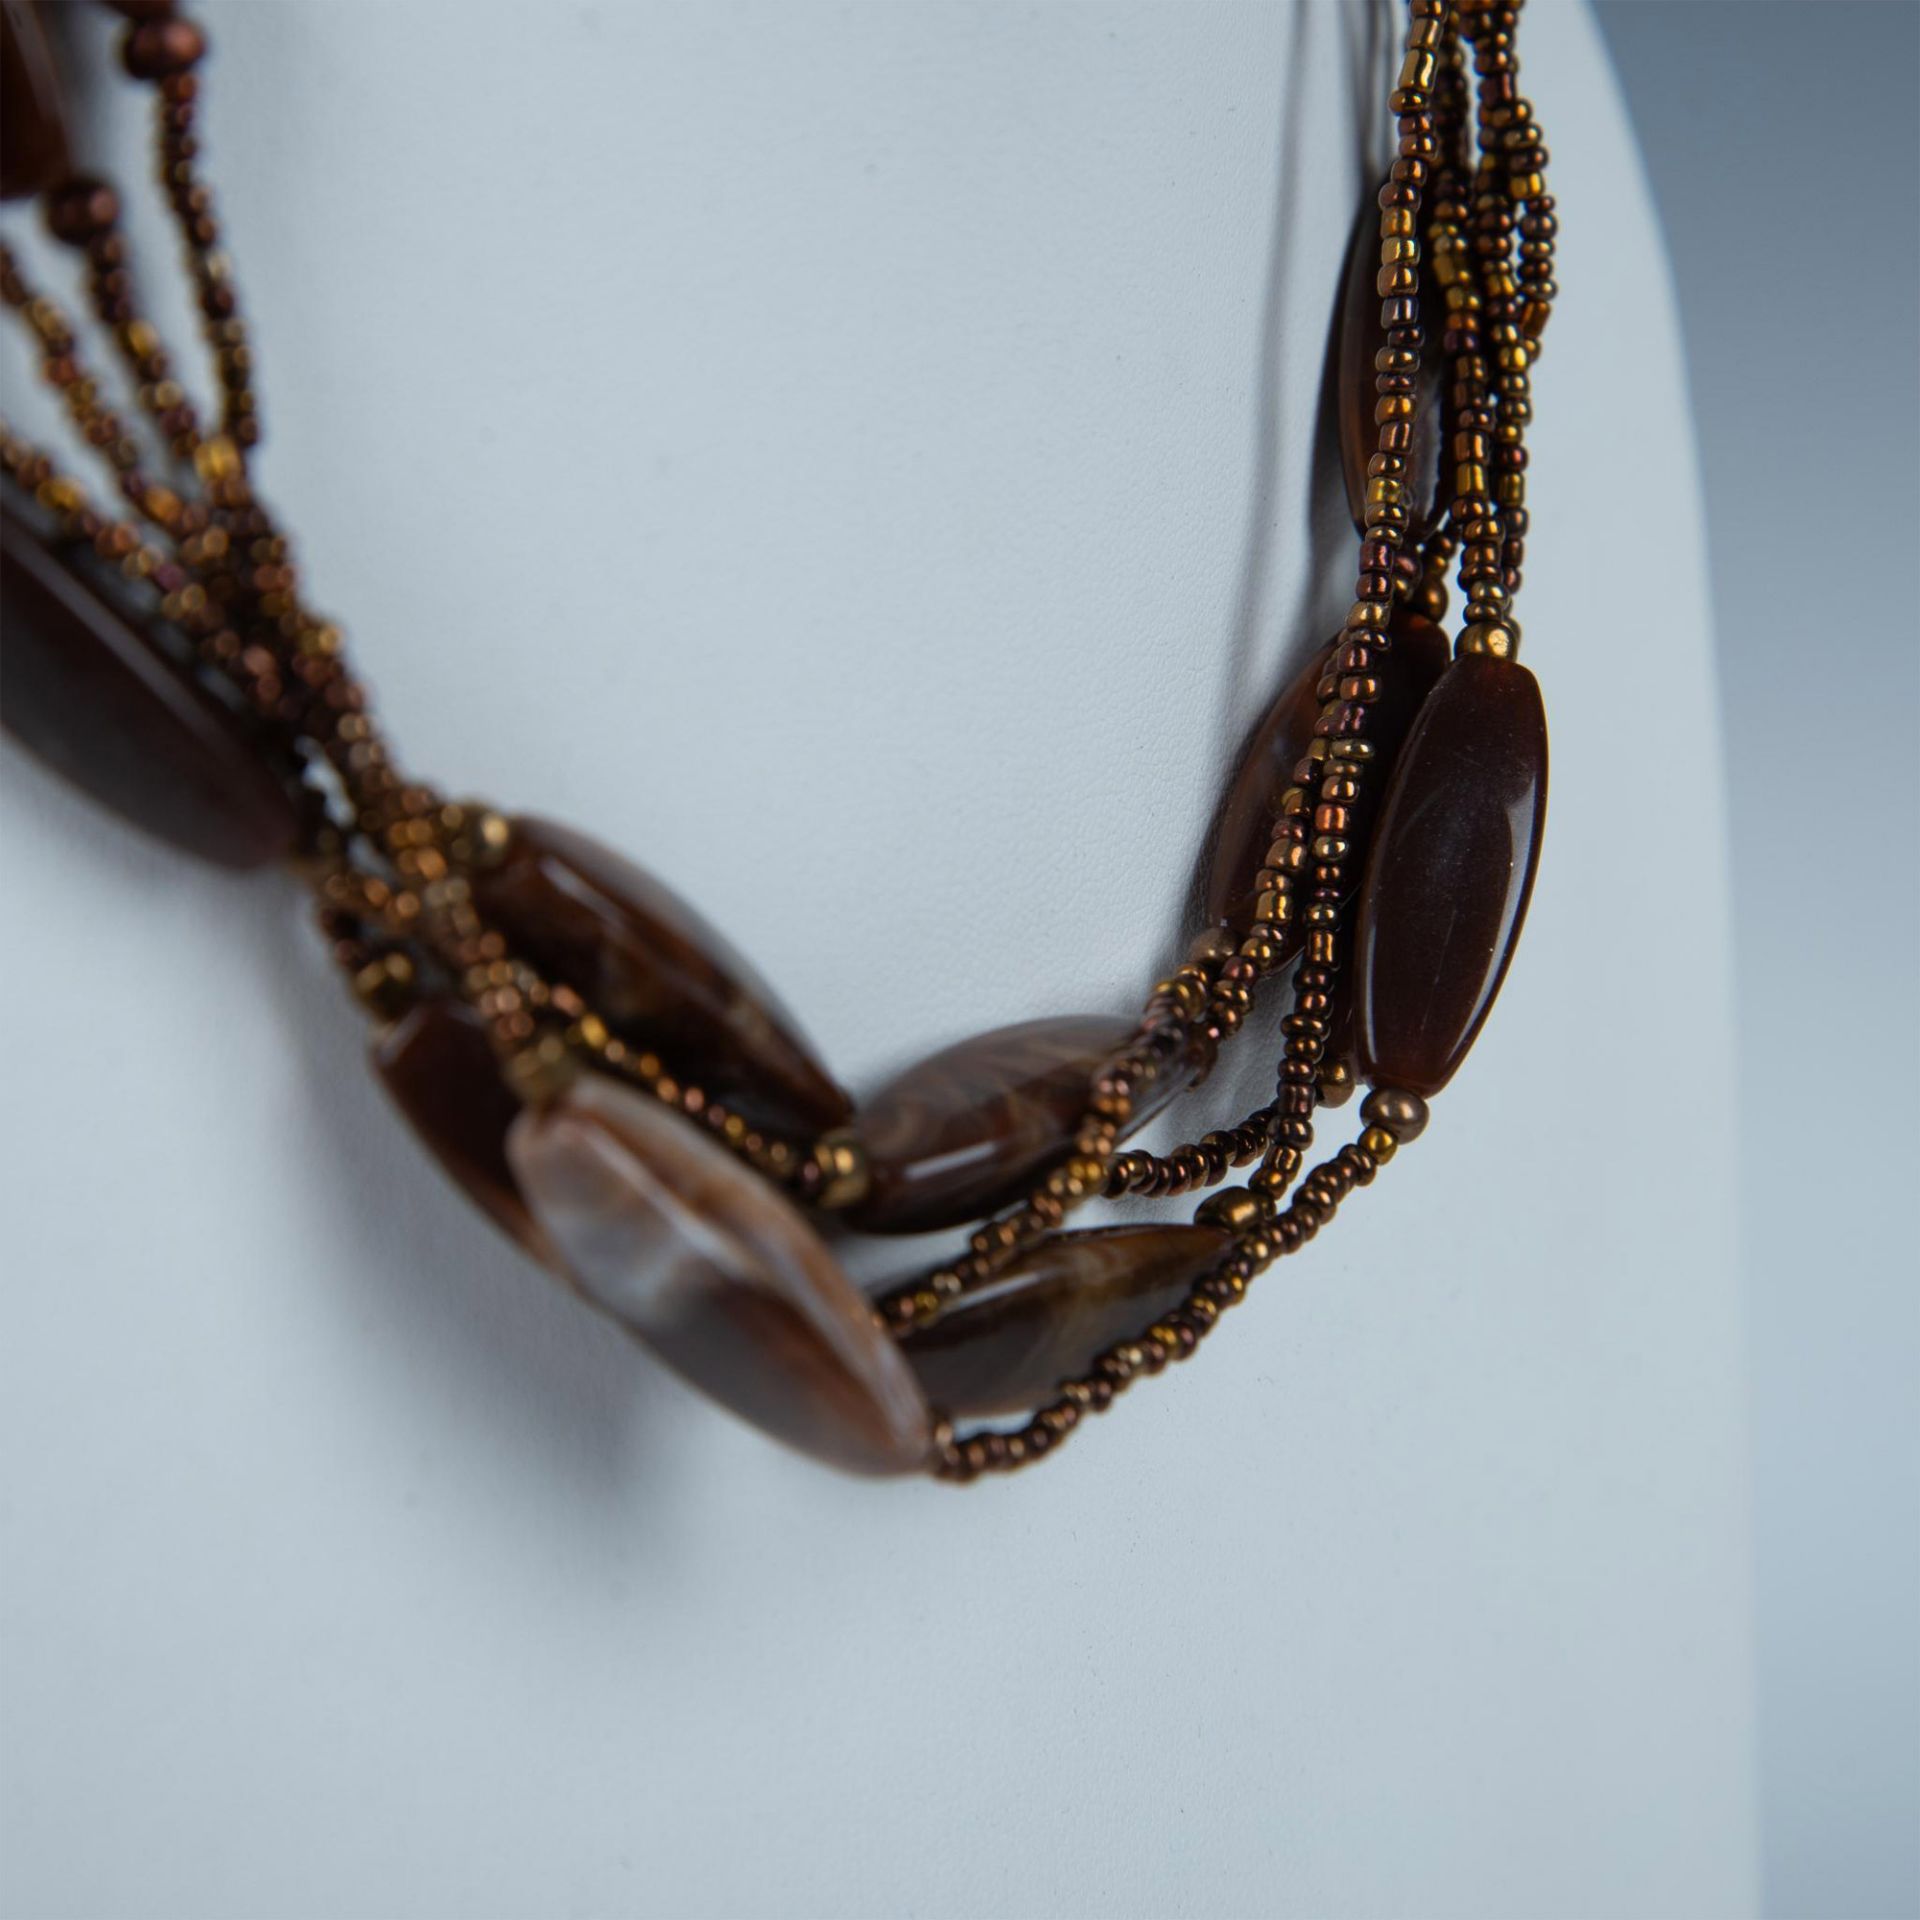 Gorgeous Five-Strand Brown & Bronze Tone Beaded Necklace - Image 2 of 3